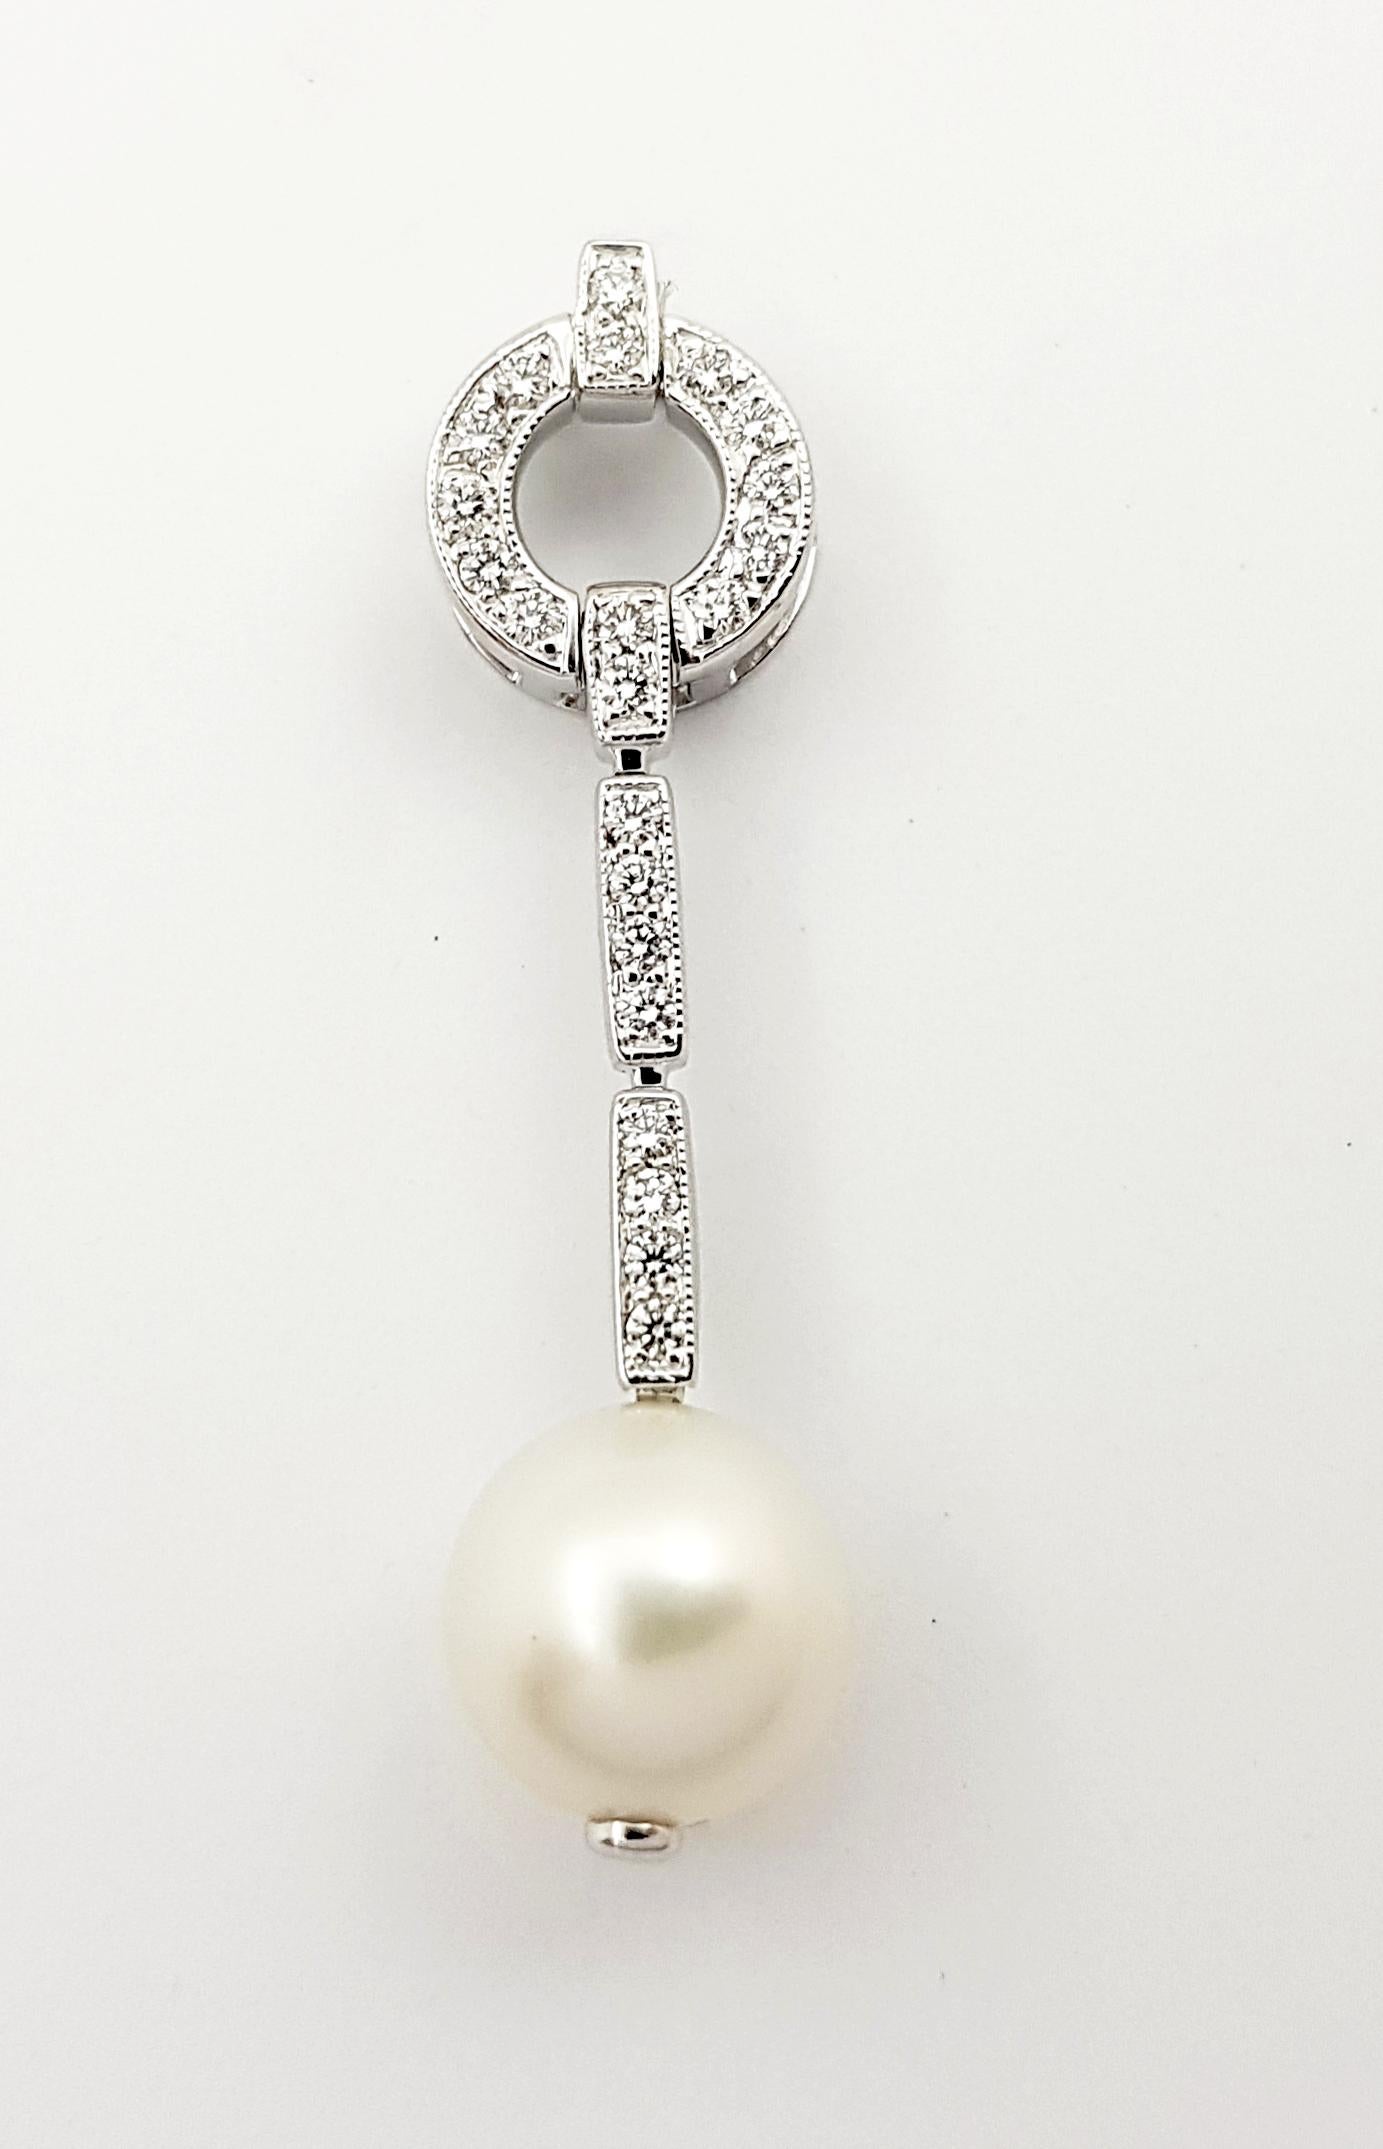 South Sea Pearl with Diamond 0.37 carat Pendant set in 18K White Gold Settings
(chain not included)

Width: 1.2 cm 
Length: 4.5  cm
Total Weight: 6.19 grams

South Sea Pearl Approximately: 10 mm

